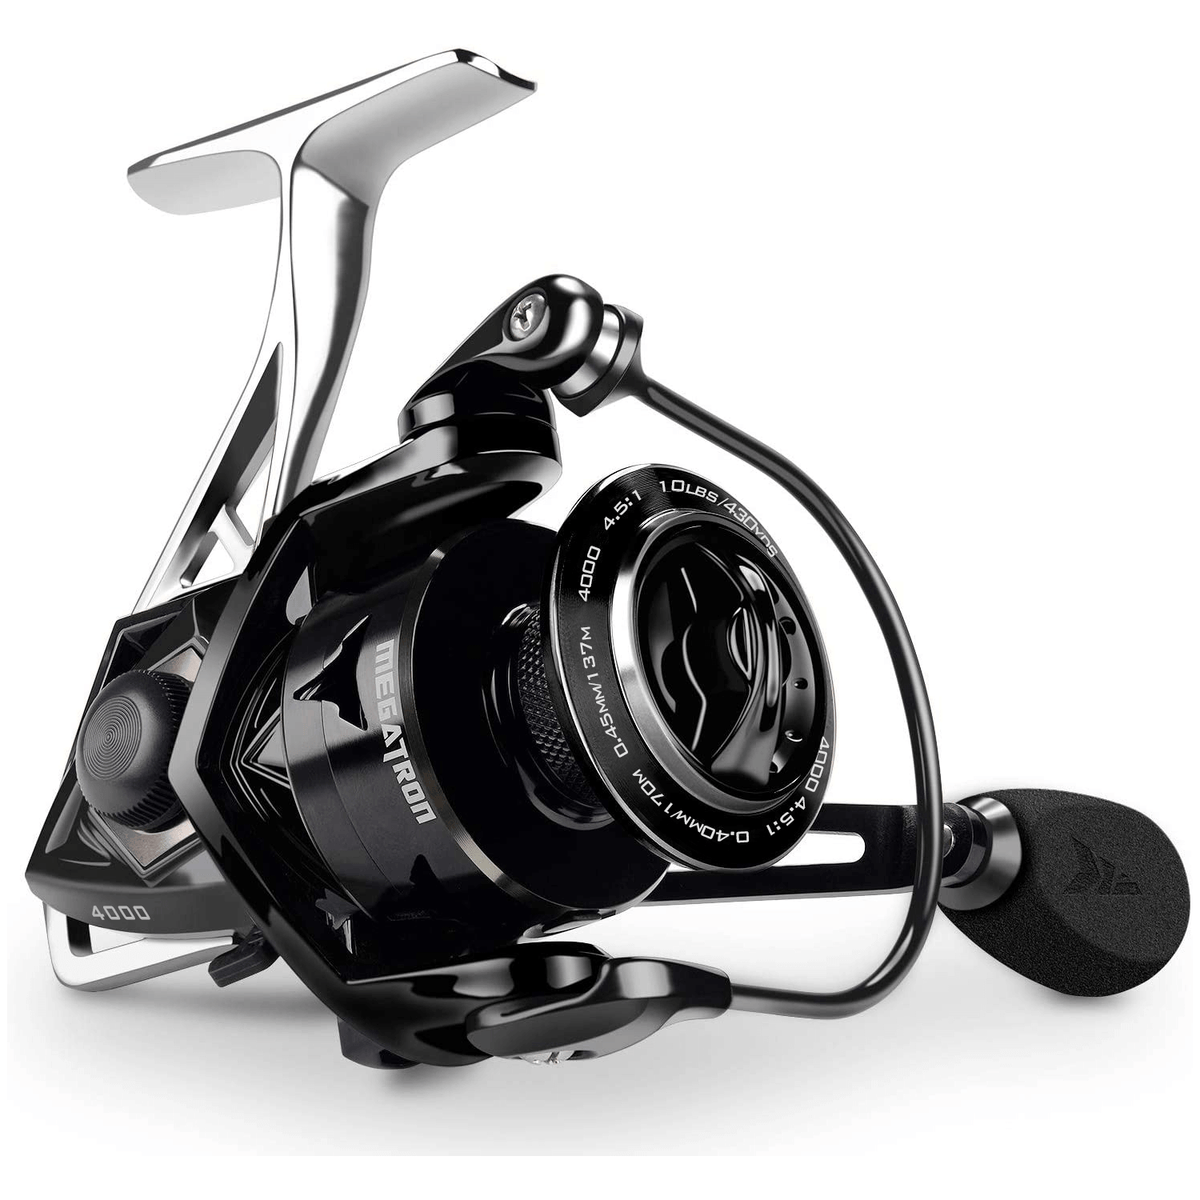 KastKing Megtron 6000 spin fishing reel introduction and overview